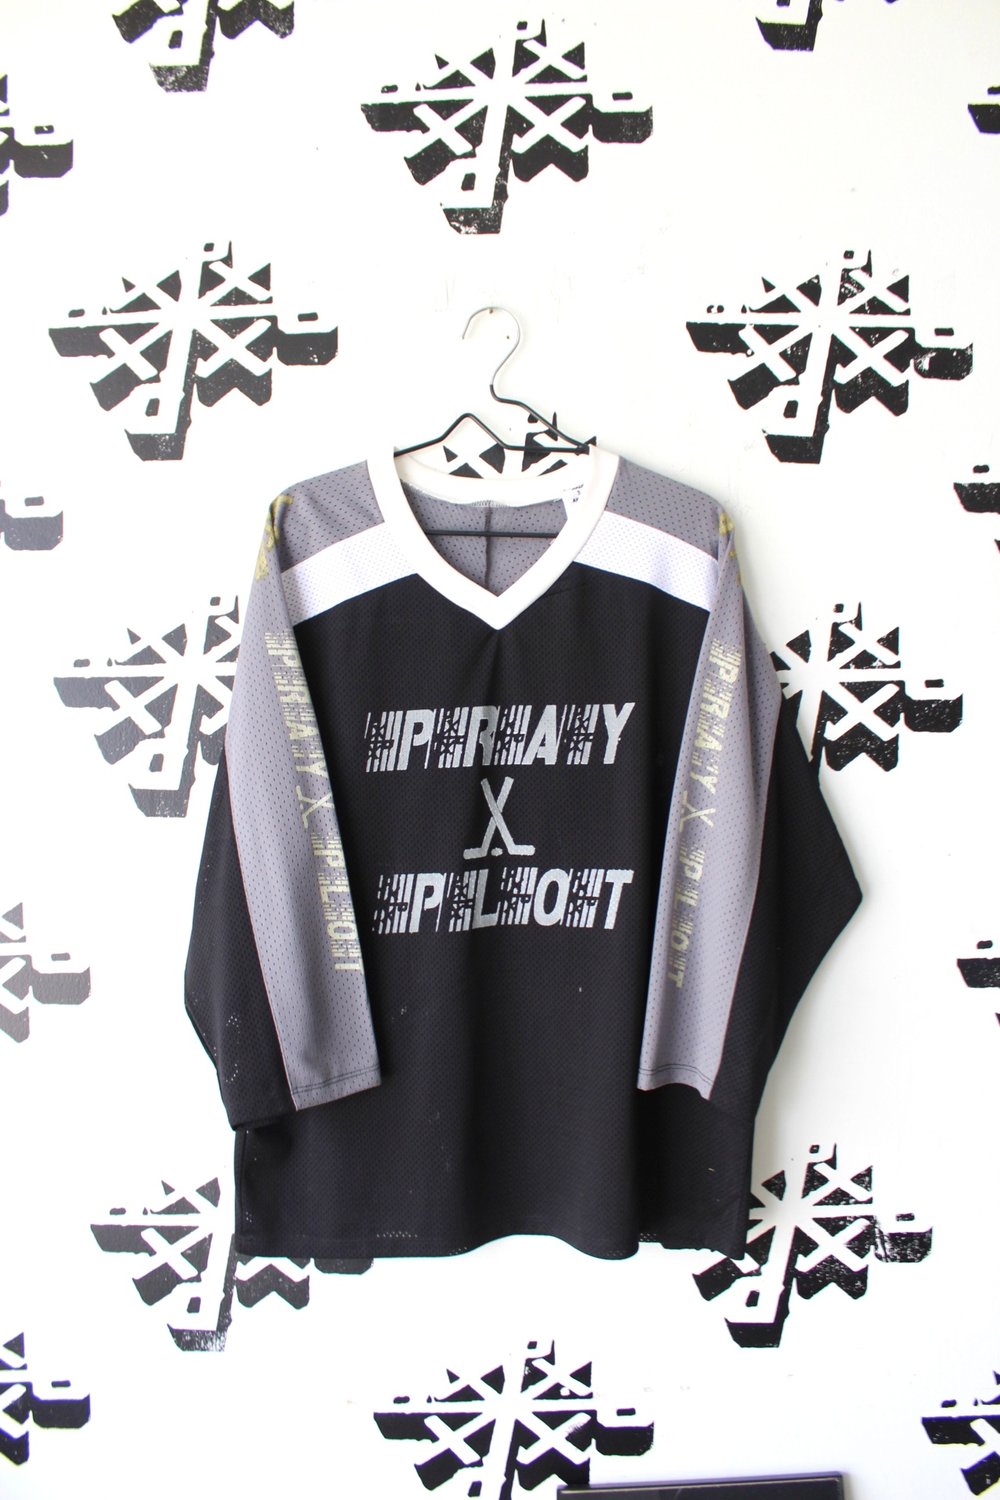 cold player hockey jersey in blk/gray/wht